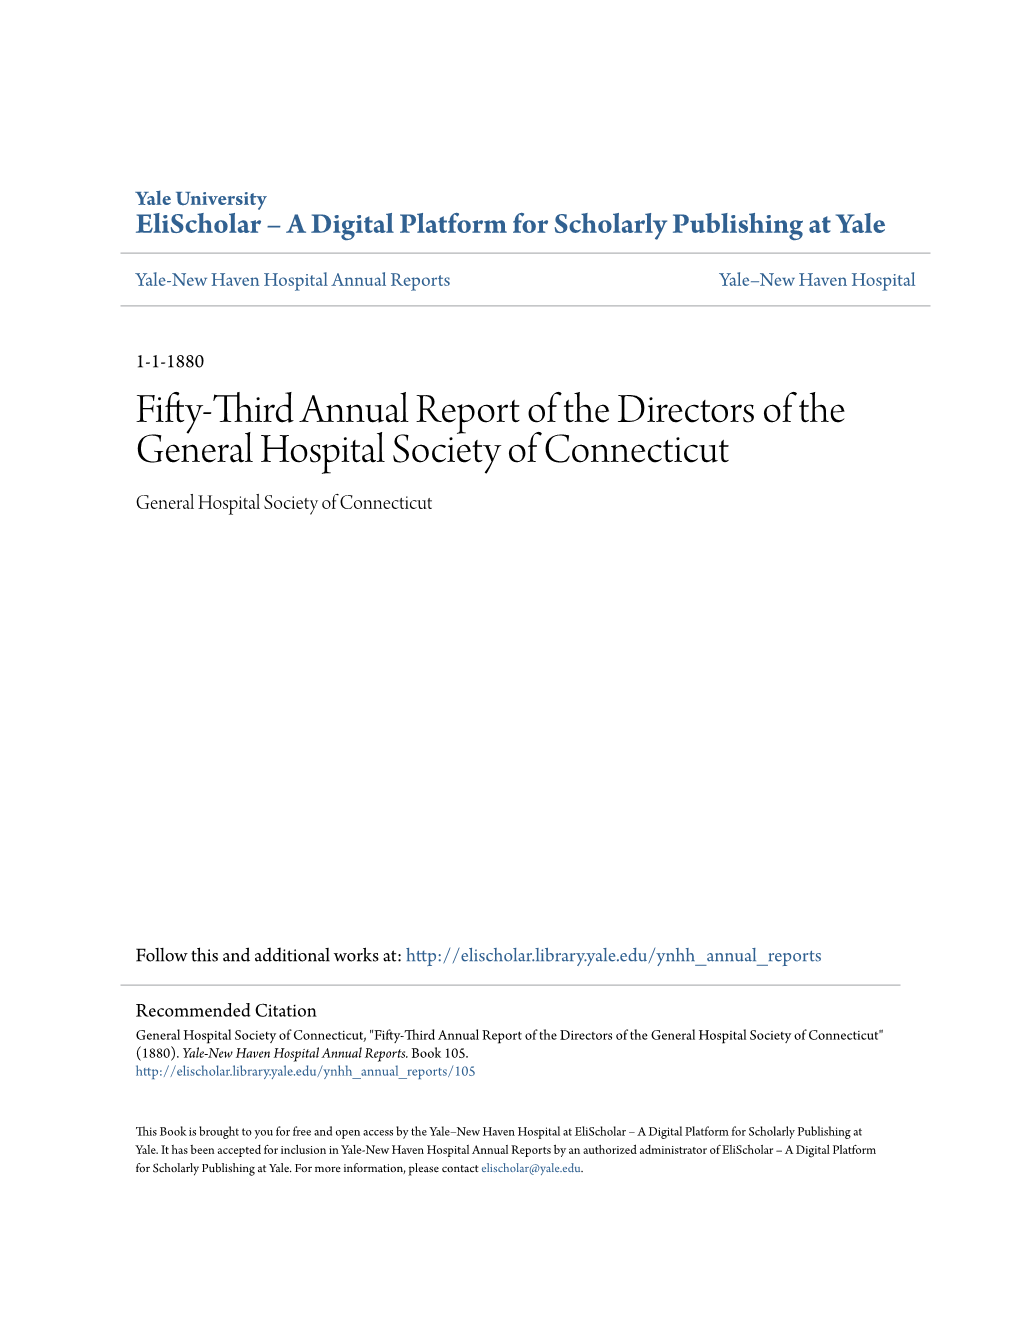 Fifty-Third Annual Report of the Directors of the General Hospital Society of Connecticut General Hospital Society of Connecticut